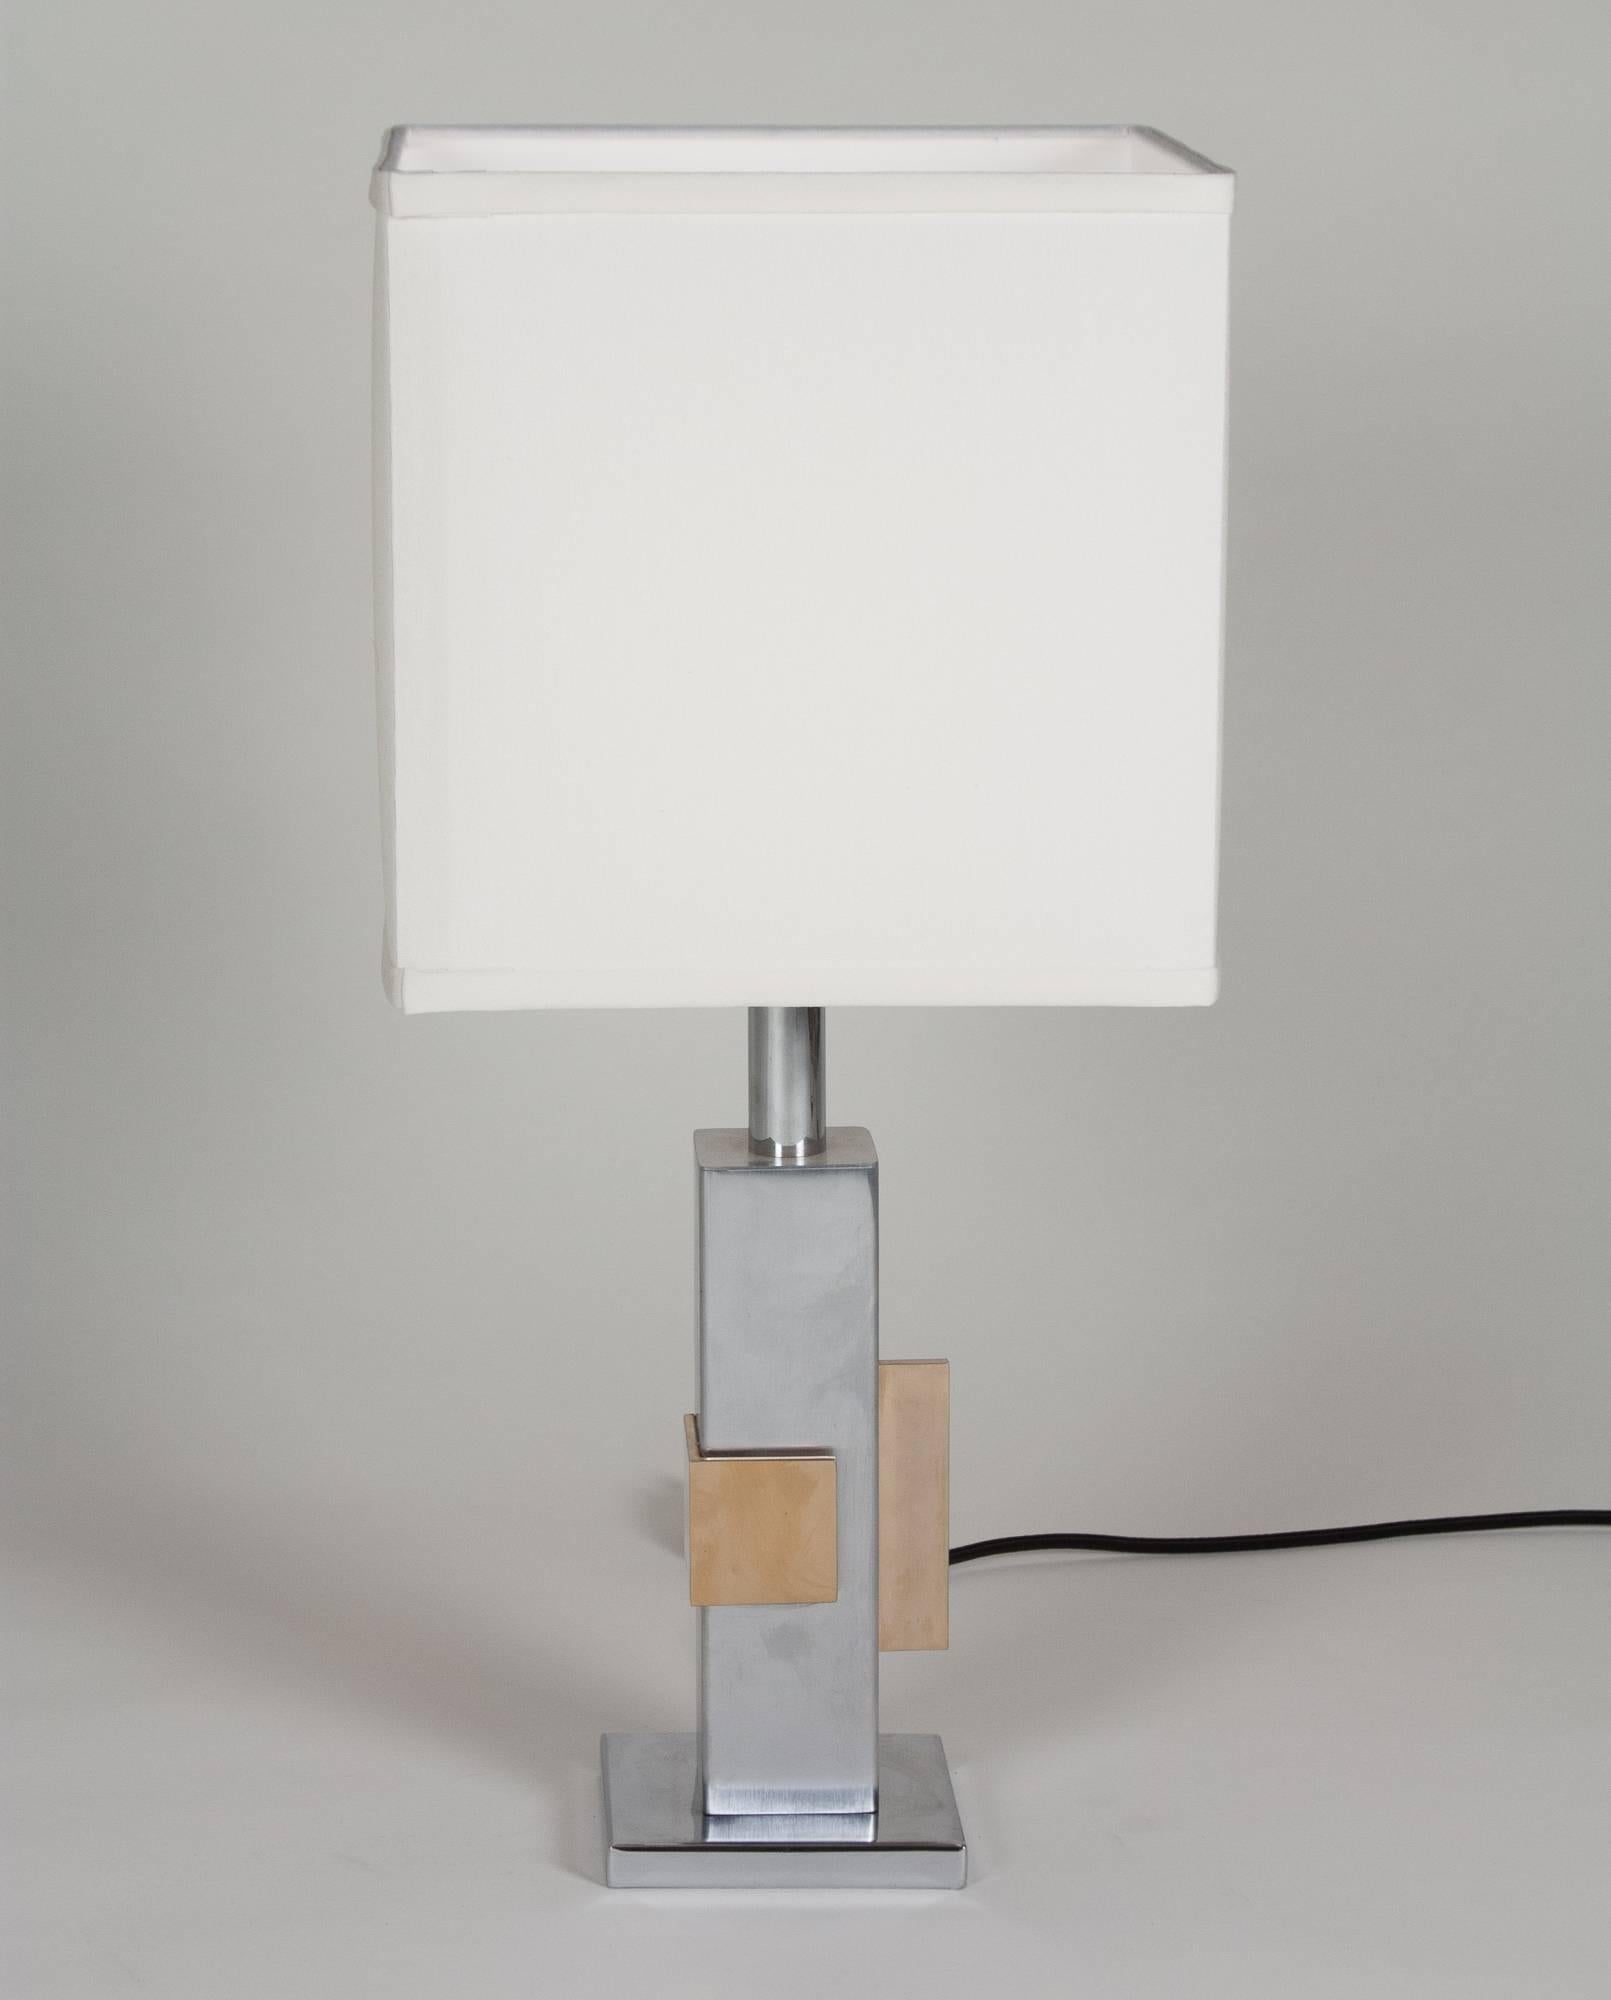 Chrome and bronze table lamp, the square chrome column having two applied bronze geometric elements, French, 1970s. Measures: Overall height 22 1/2 in, base measures 4 3/4 in square. Shade measures 10 in cubed. 
 